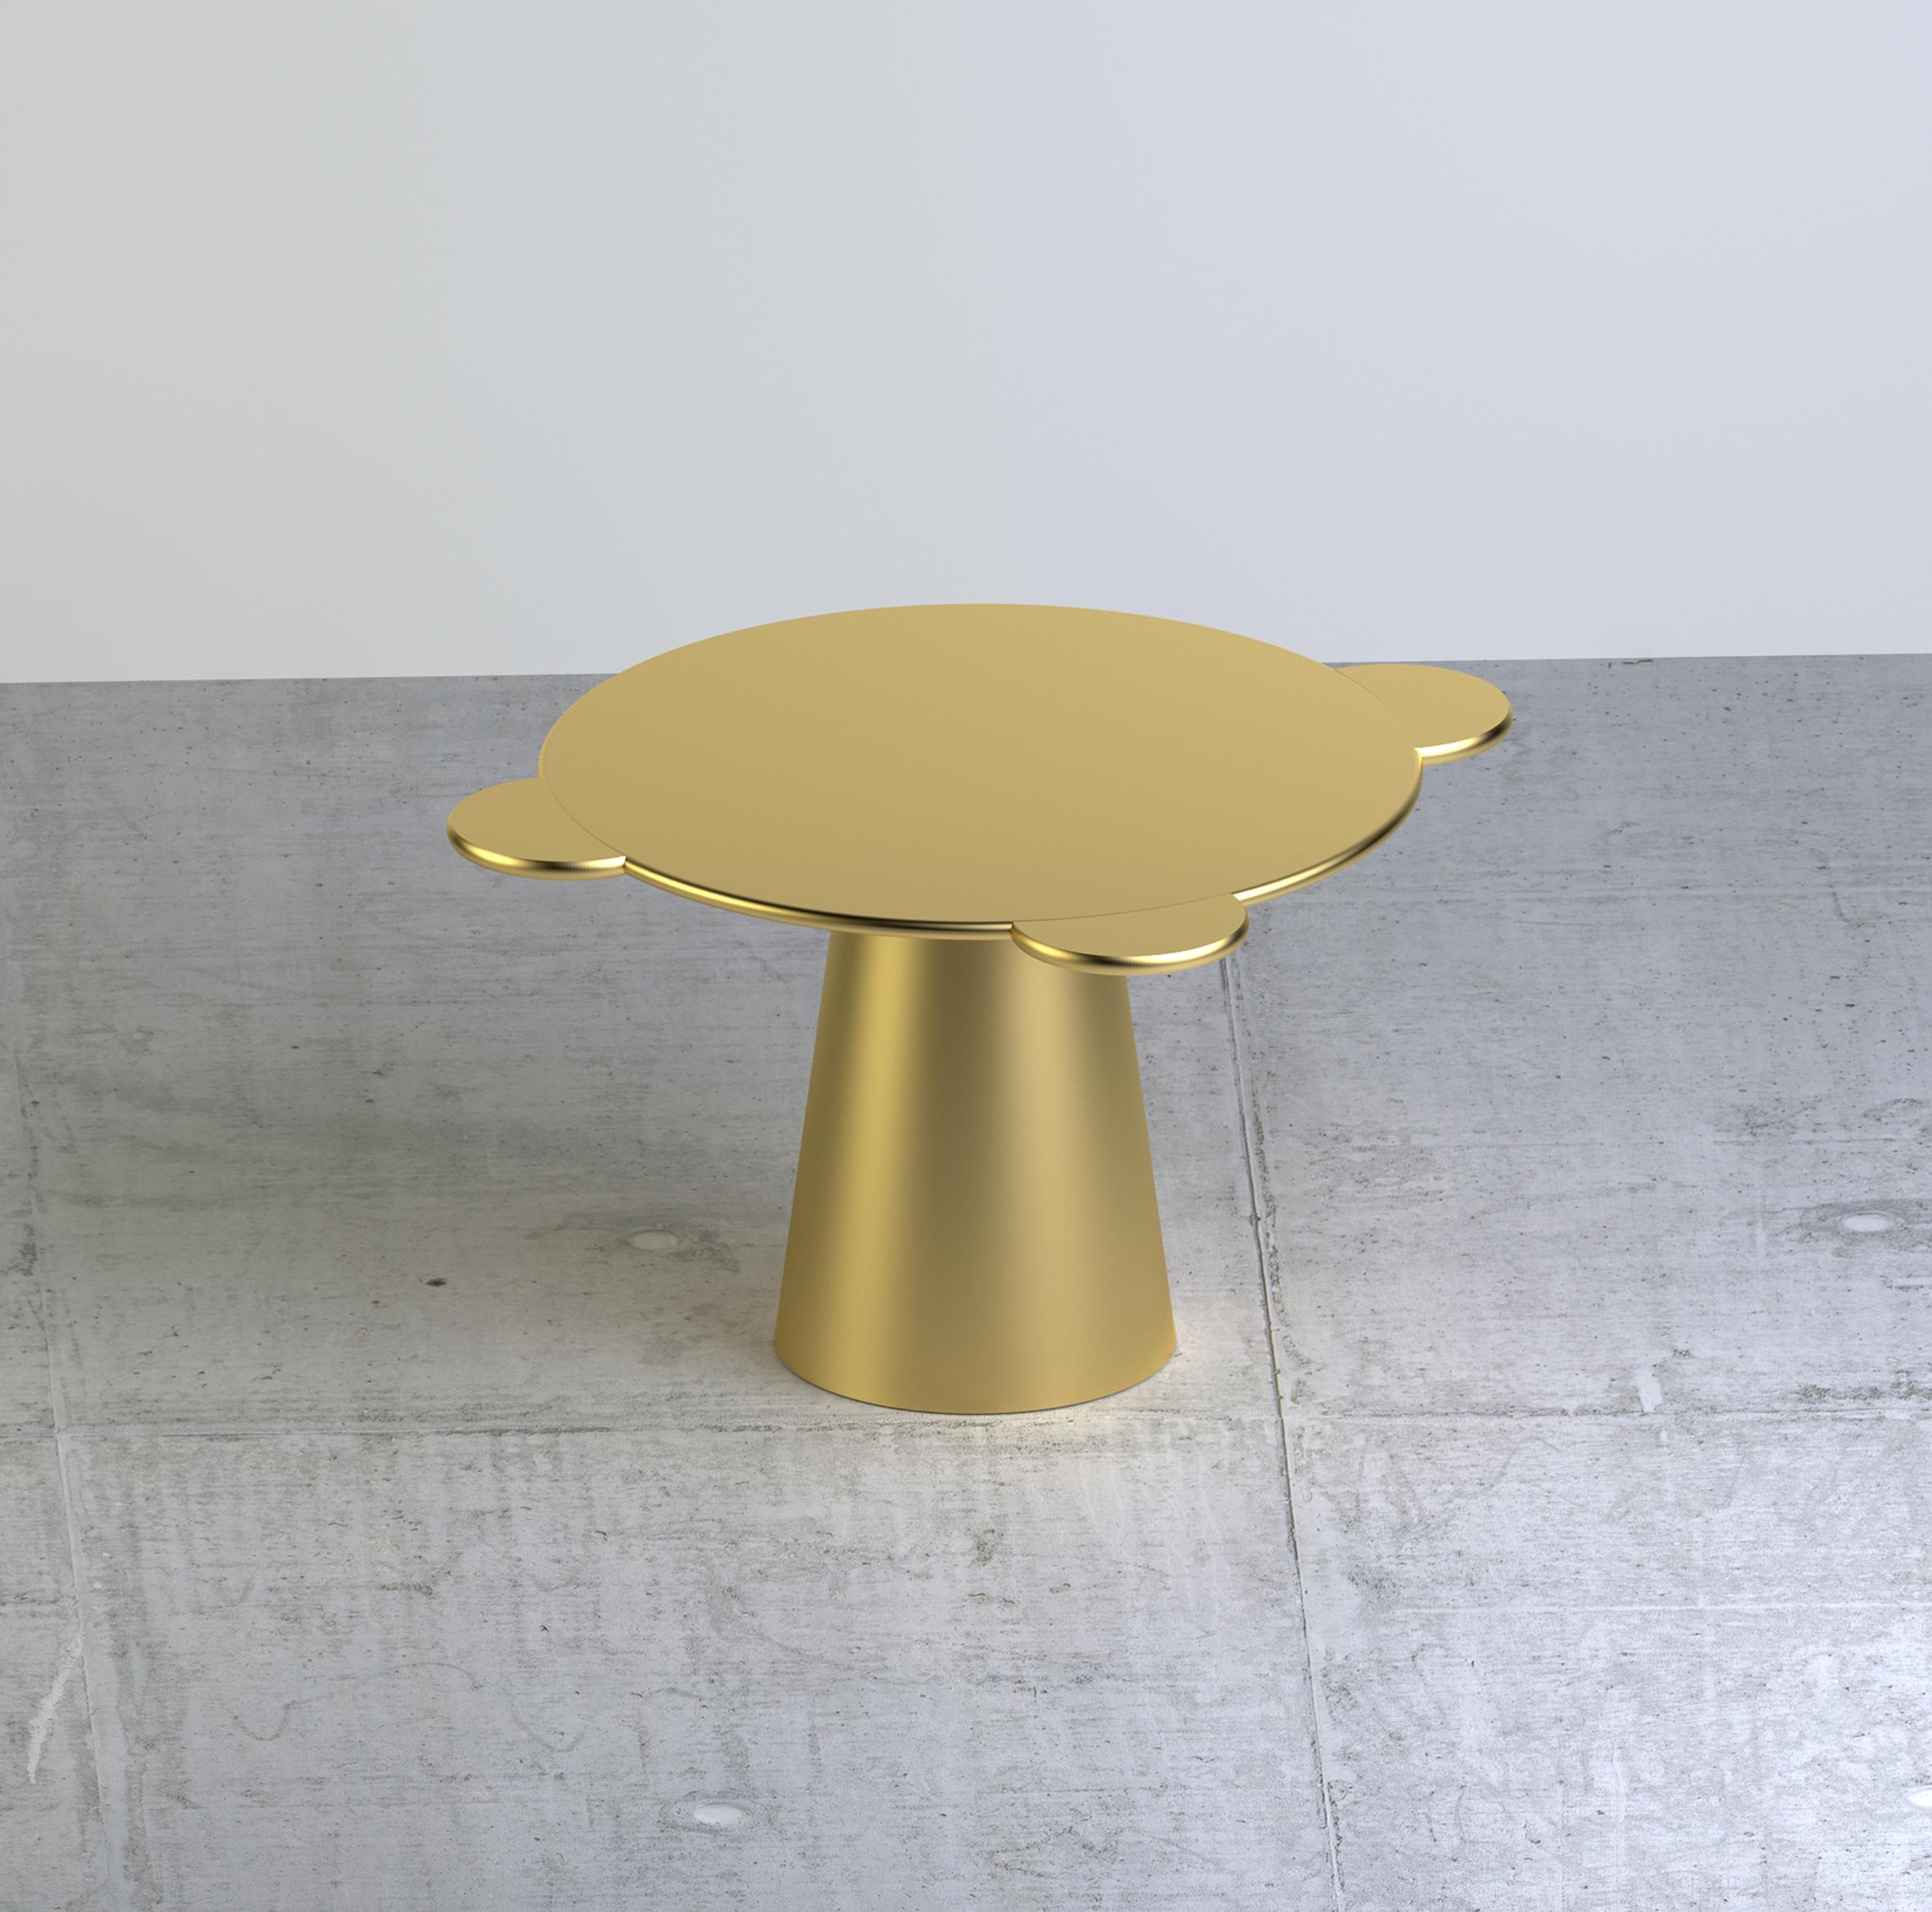 Donald is a multifunctional table with a sculpturally cosmic aspect and colorful circular shapes.

The sculptural silhouette has a wooden structure composed of a truncated cone that supports a round top adorned with three semi-circular flaps,